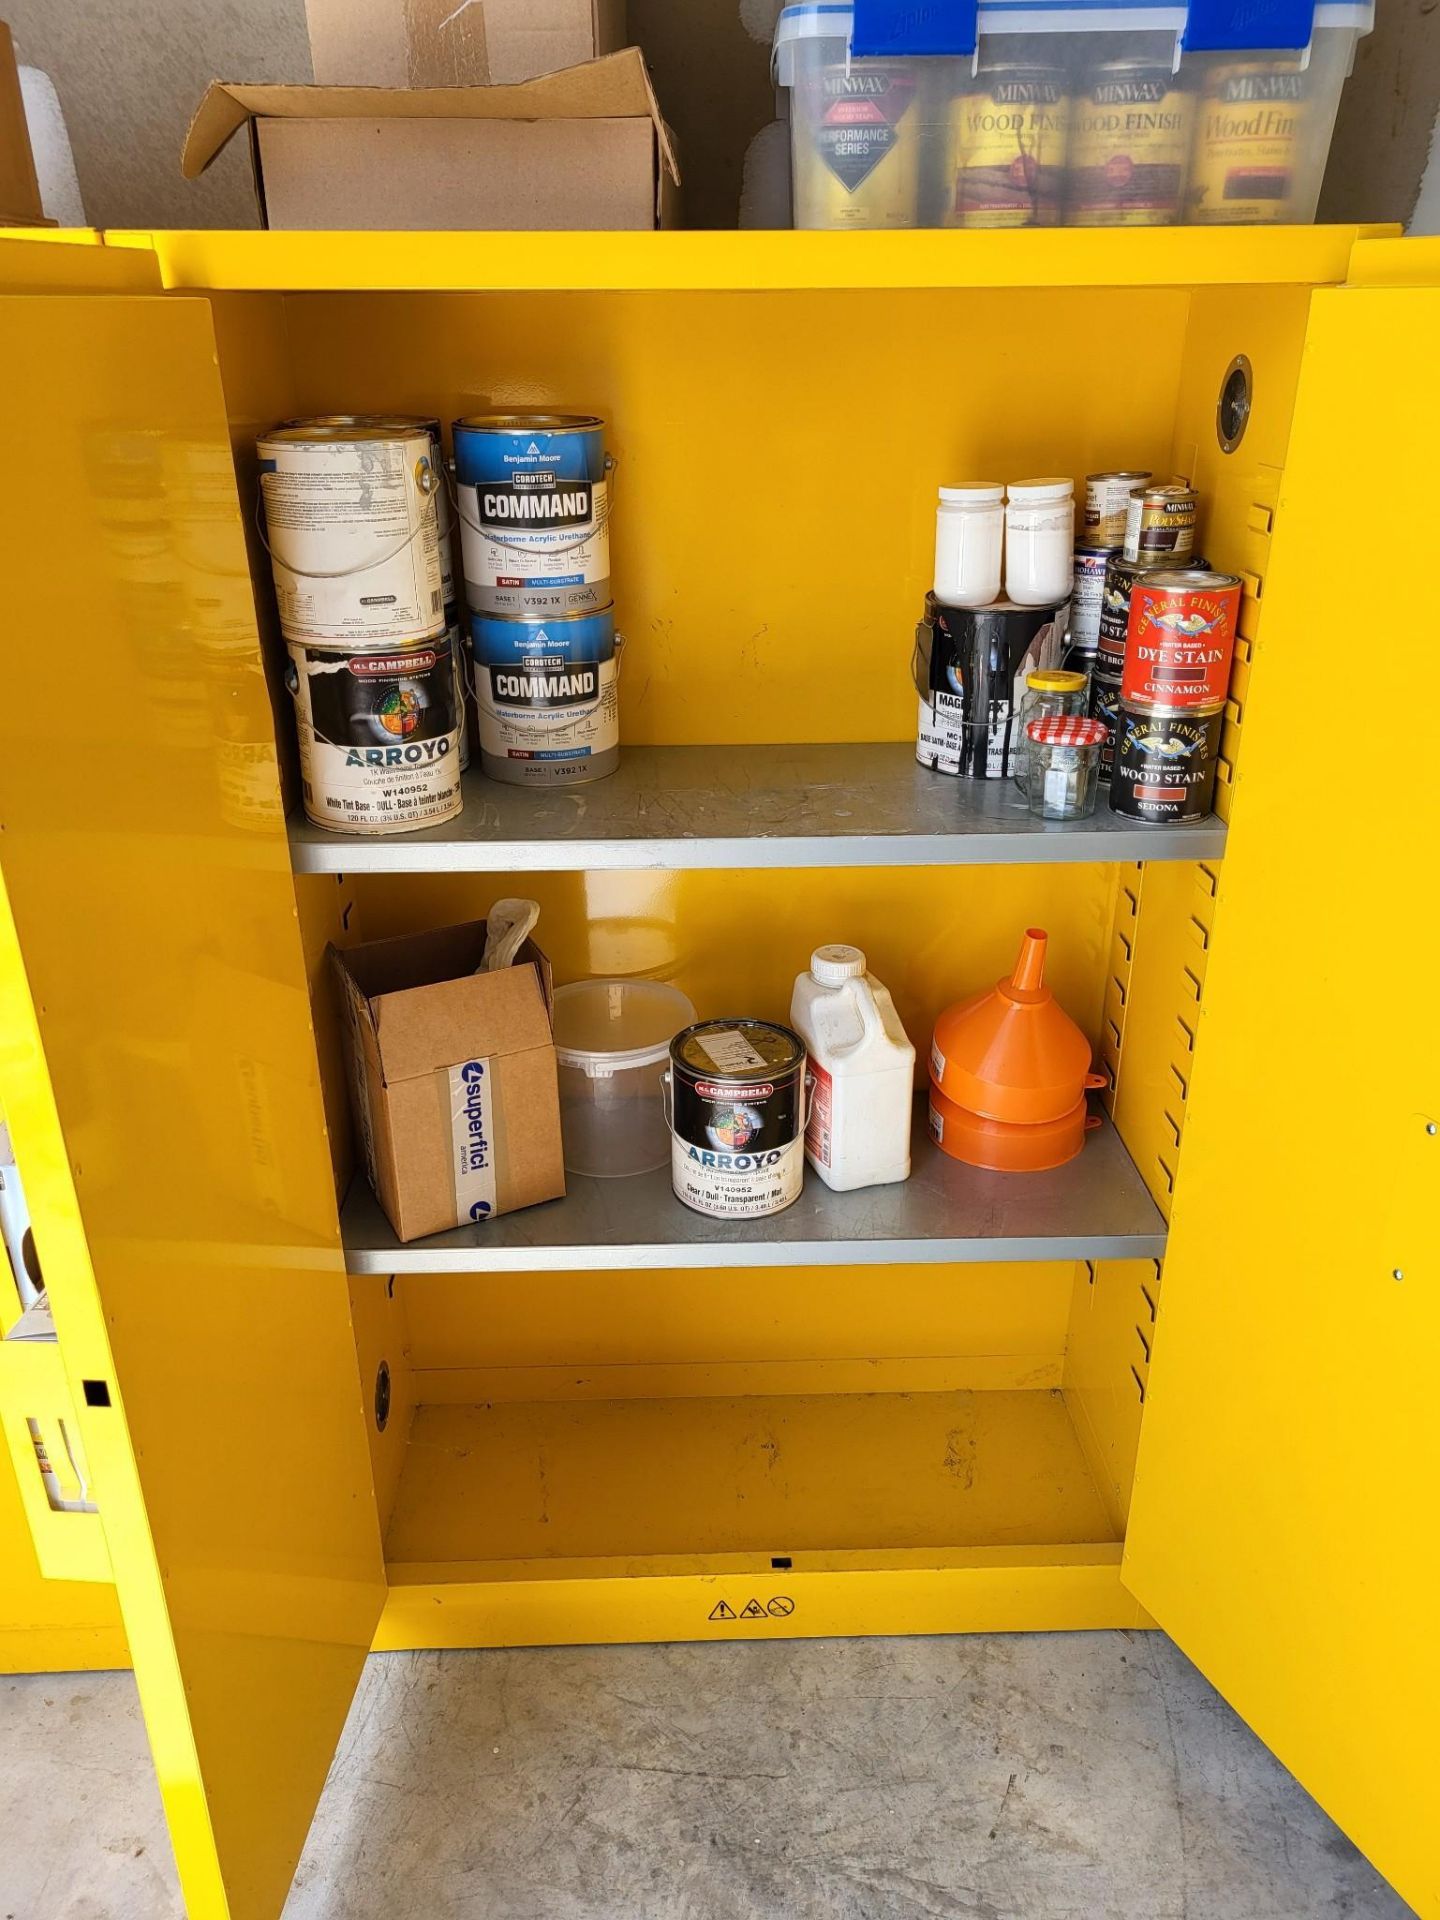 (2) EDSAL YELLOW METAL FIRE SAFE STORAGE CABINETS (CAN HOLD CLASS 3 LIQUIDS) - Image 2 of 5